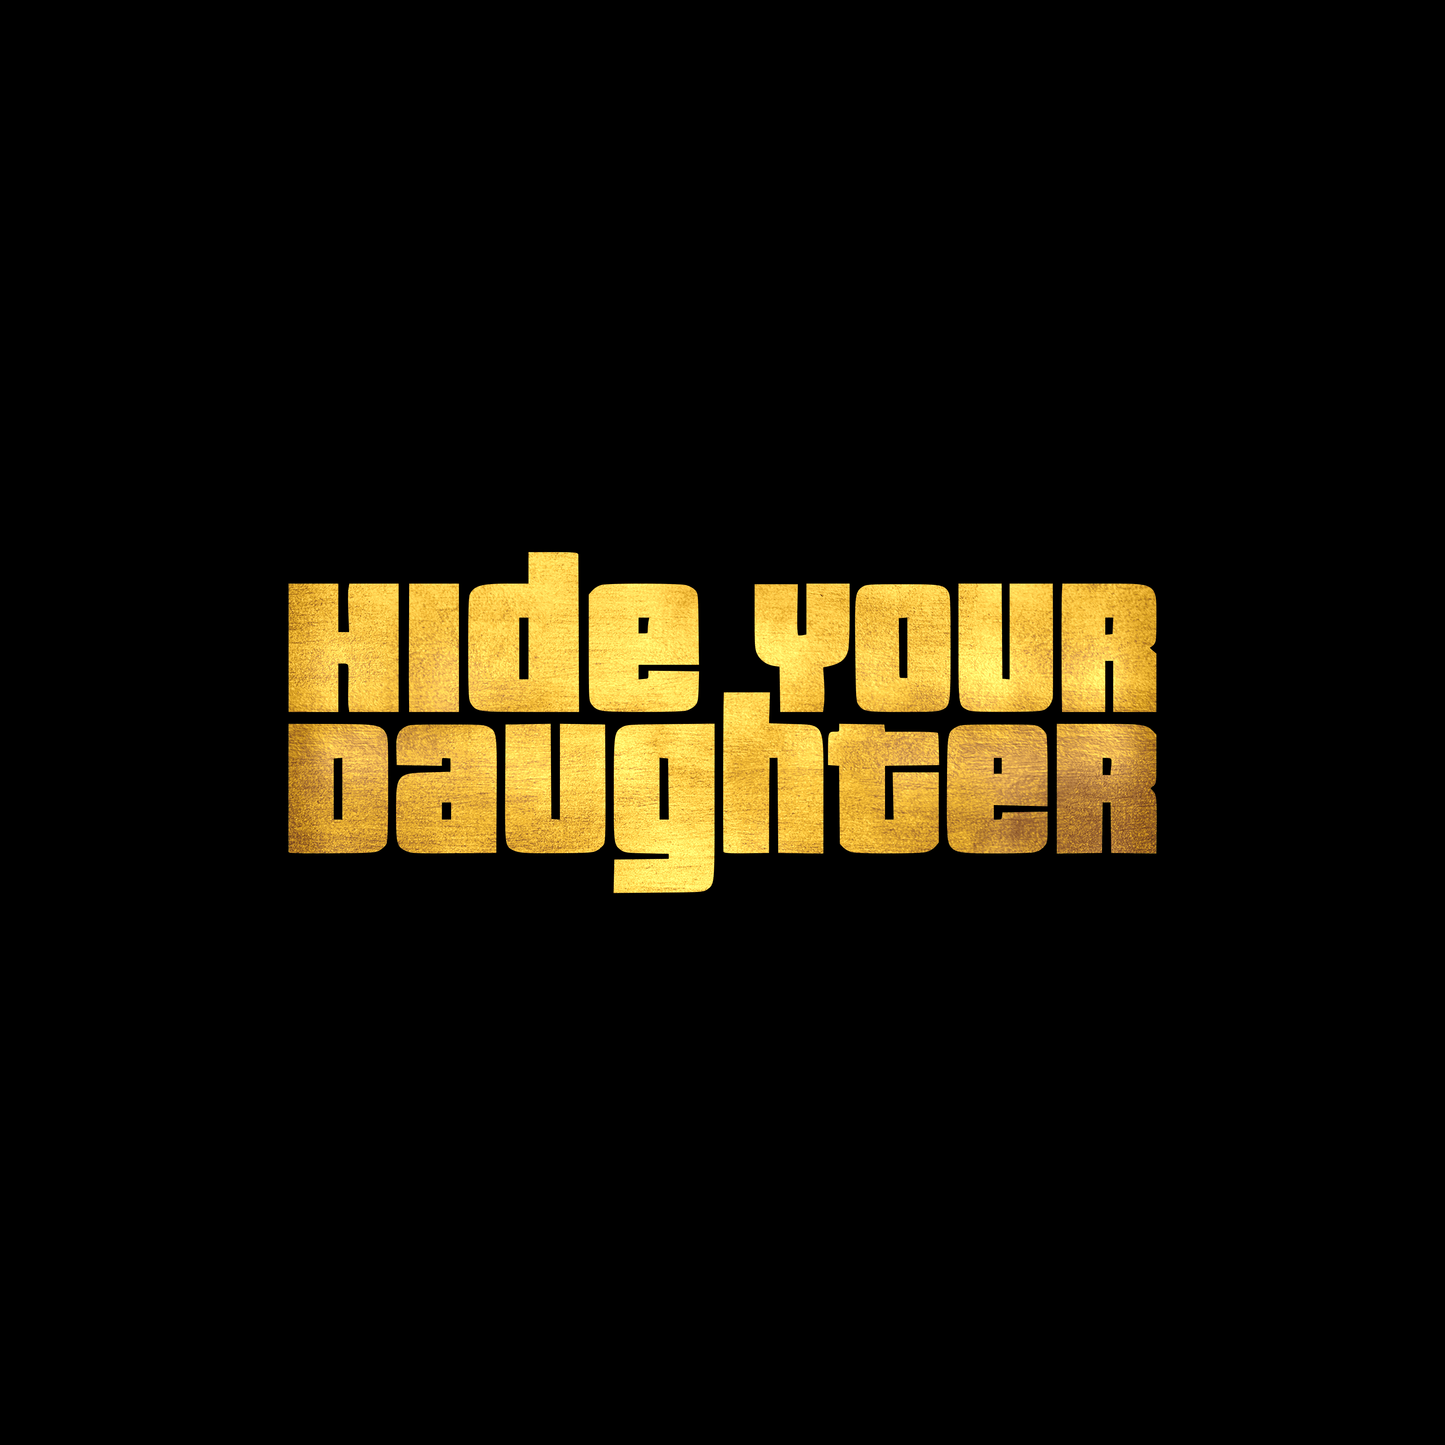 Hide your daughter sticker decal